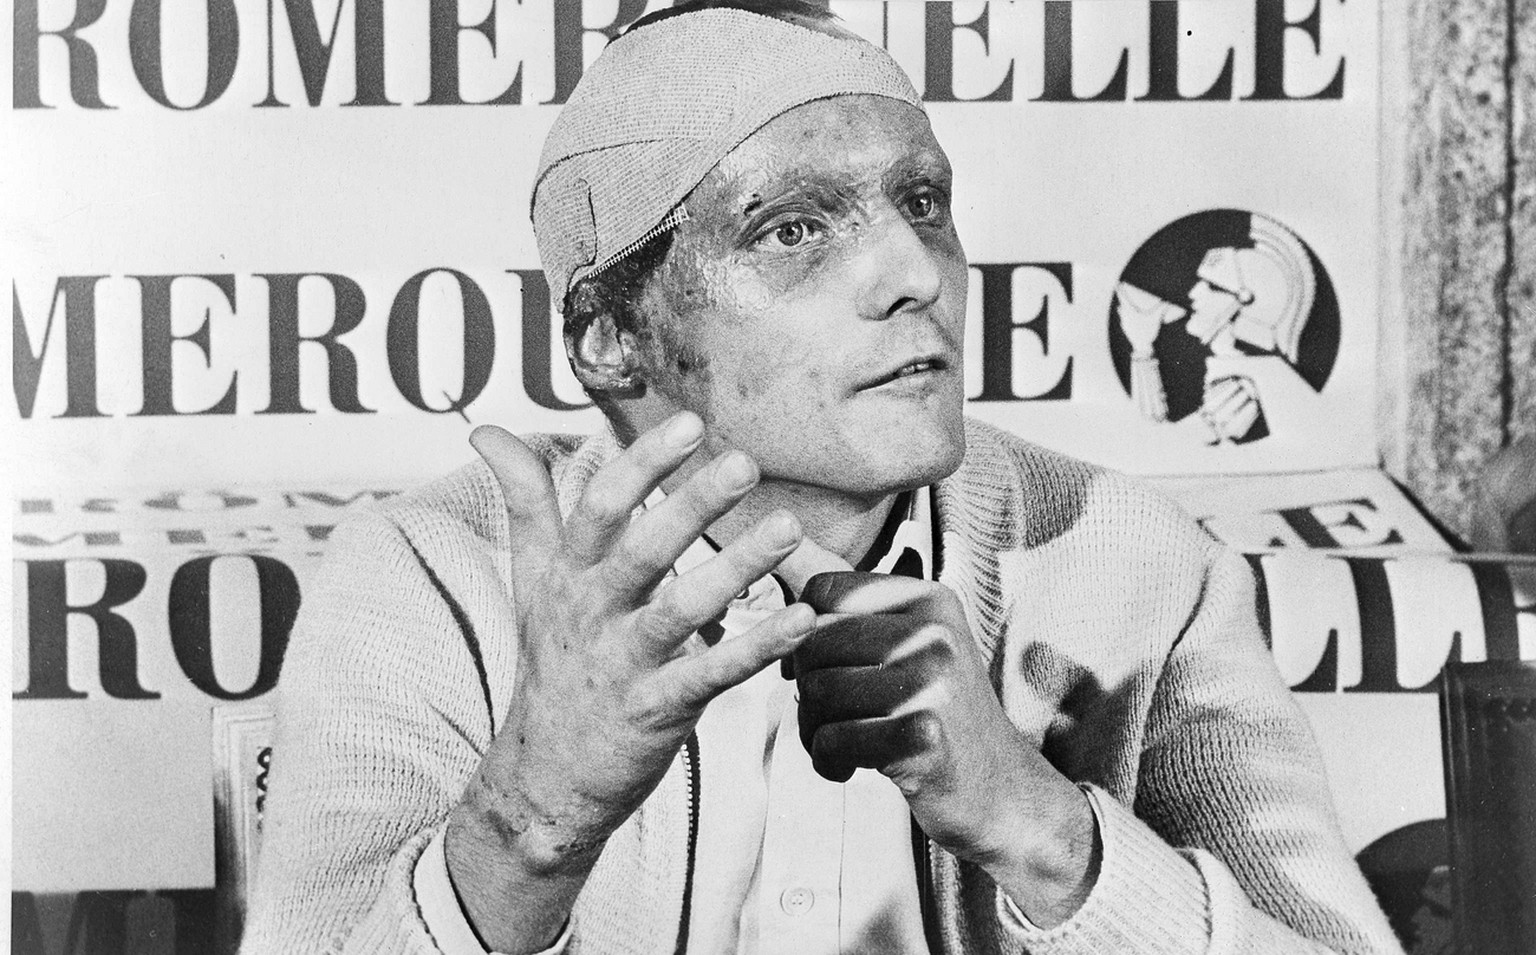 Austrian auto racer Niki Lauda, following his near fatal crash at the West German Grand Prix six weeks ago, announced he would start at the Italian Grand Prix at Monza, Sept. 12. (AP Photo) (KEYSTONE/ ...